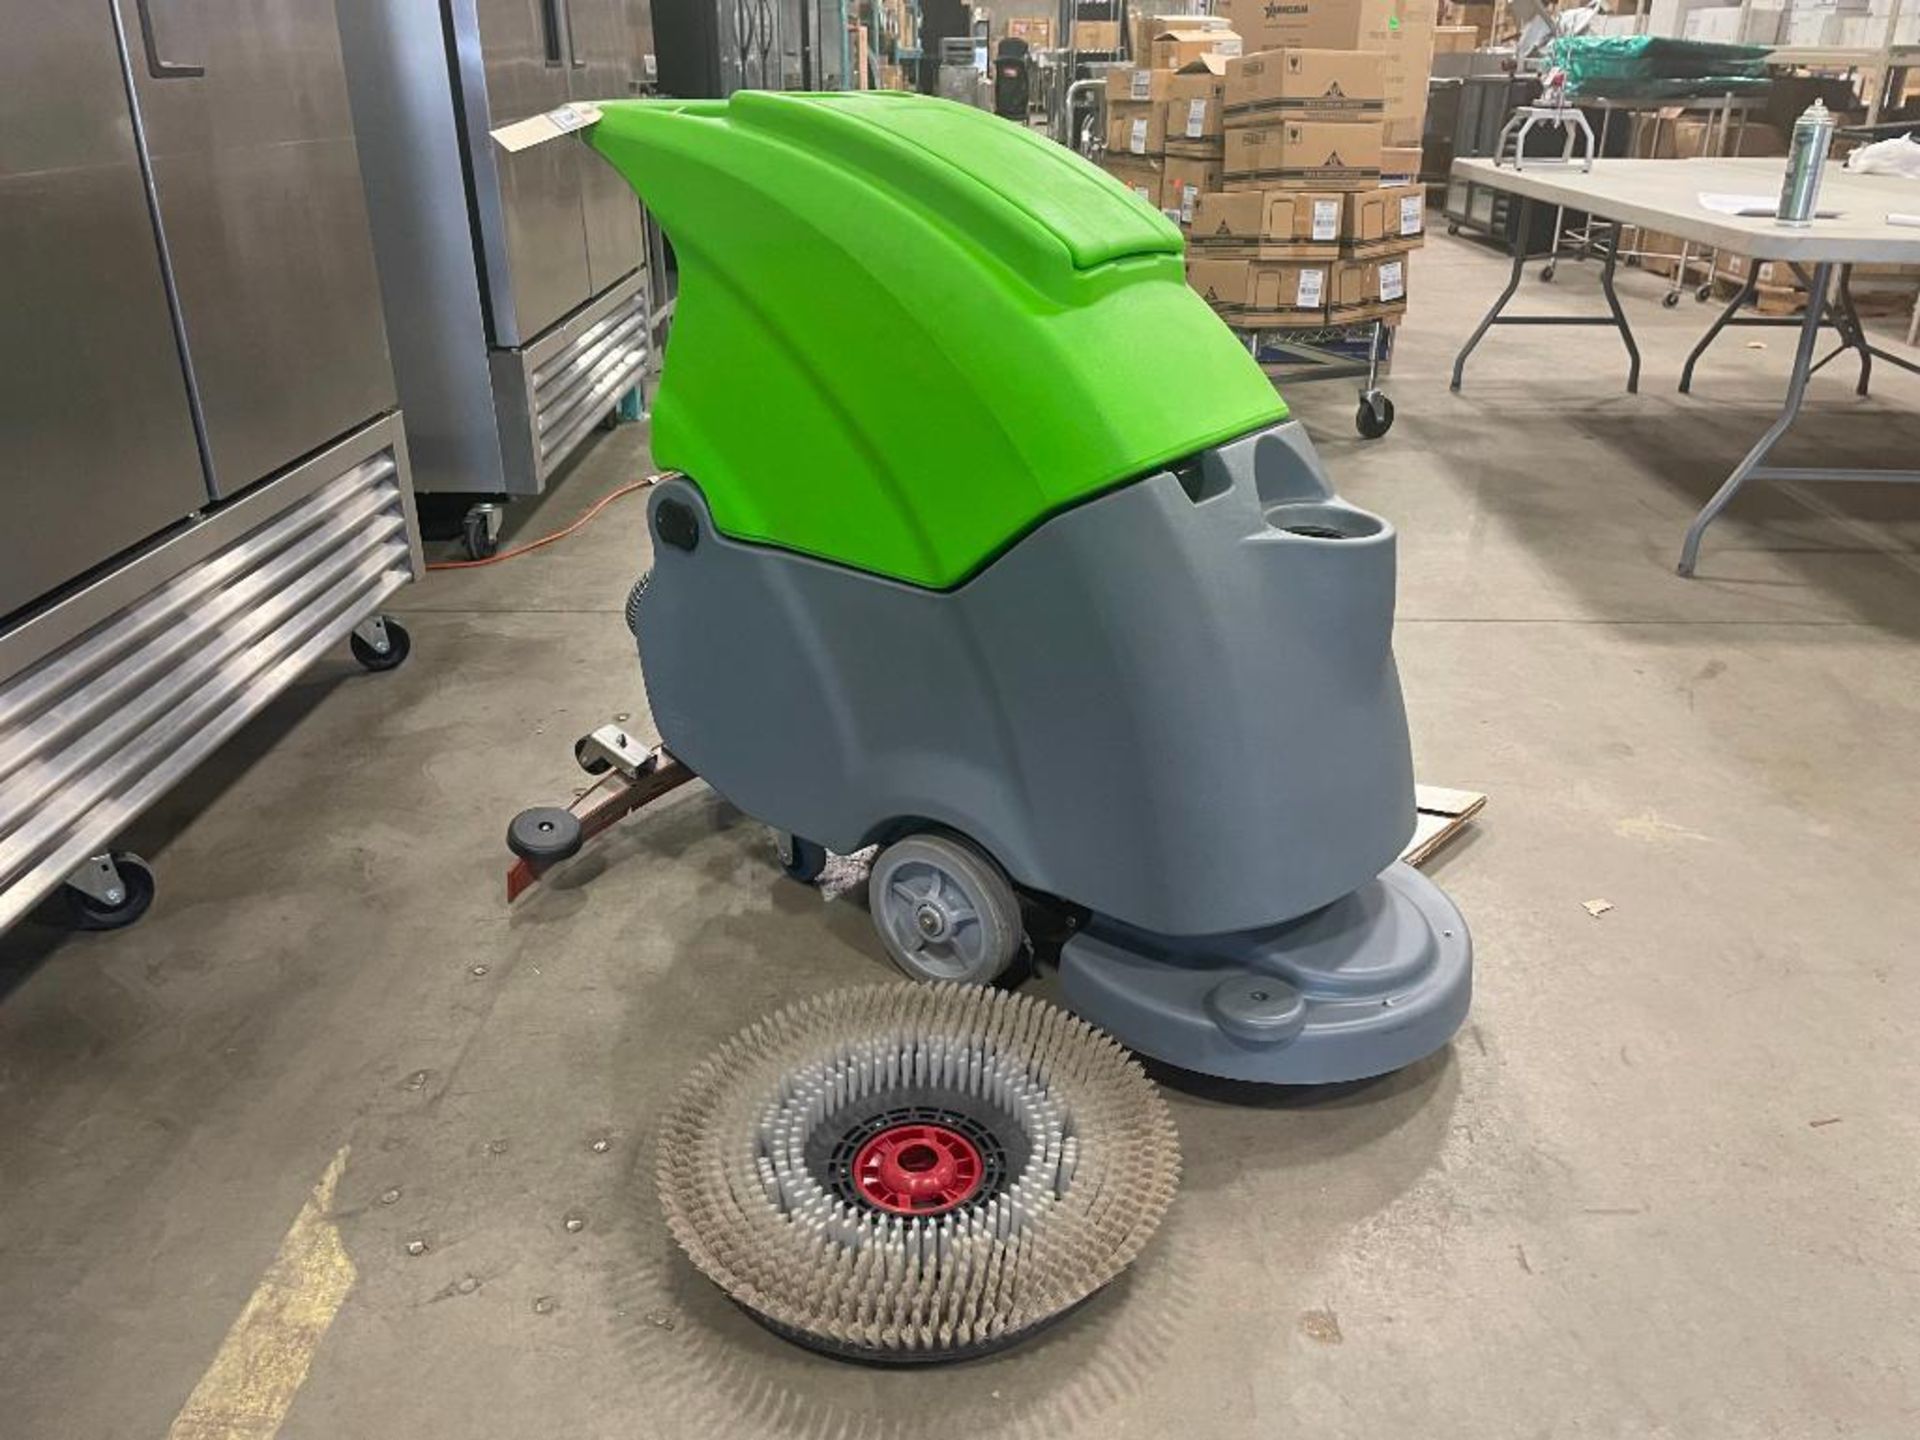 NEW 2022 AOKEQI OK-500 19" WIDE WALK BEHIND ELECTRIC INDUSTRIAL AUTO FLOOR SCRUBBER/DRYER - Image 4 of 9